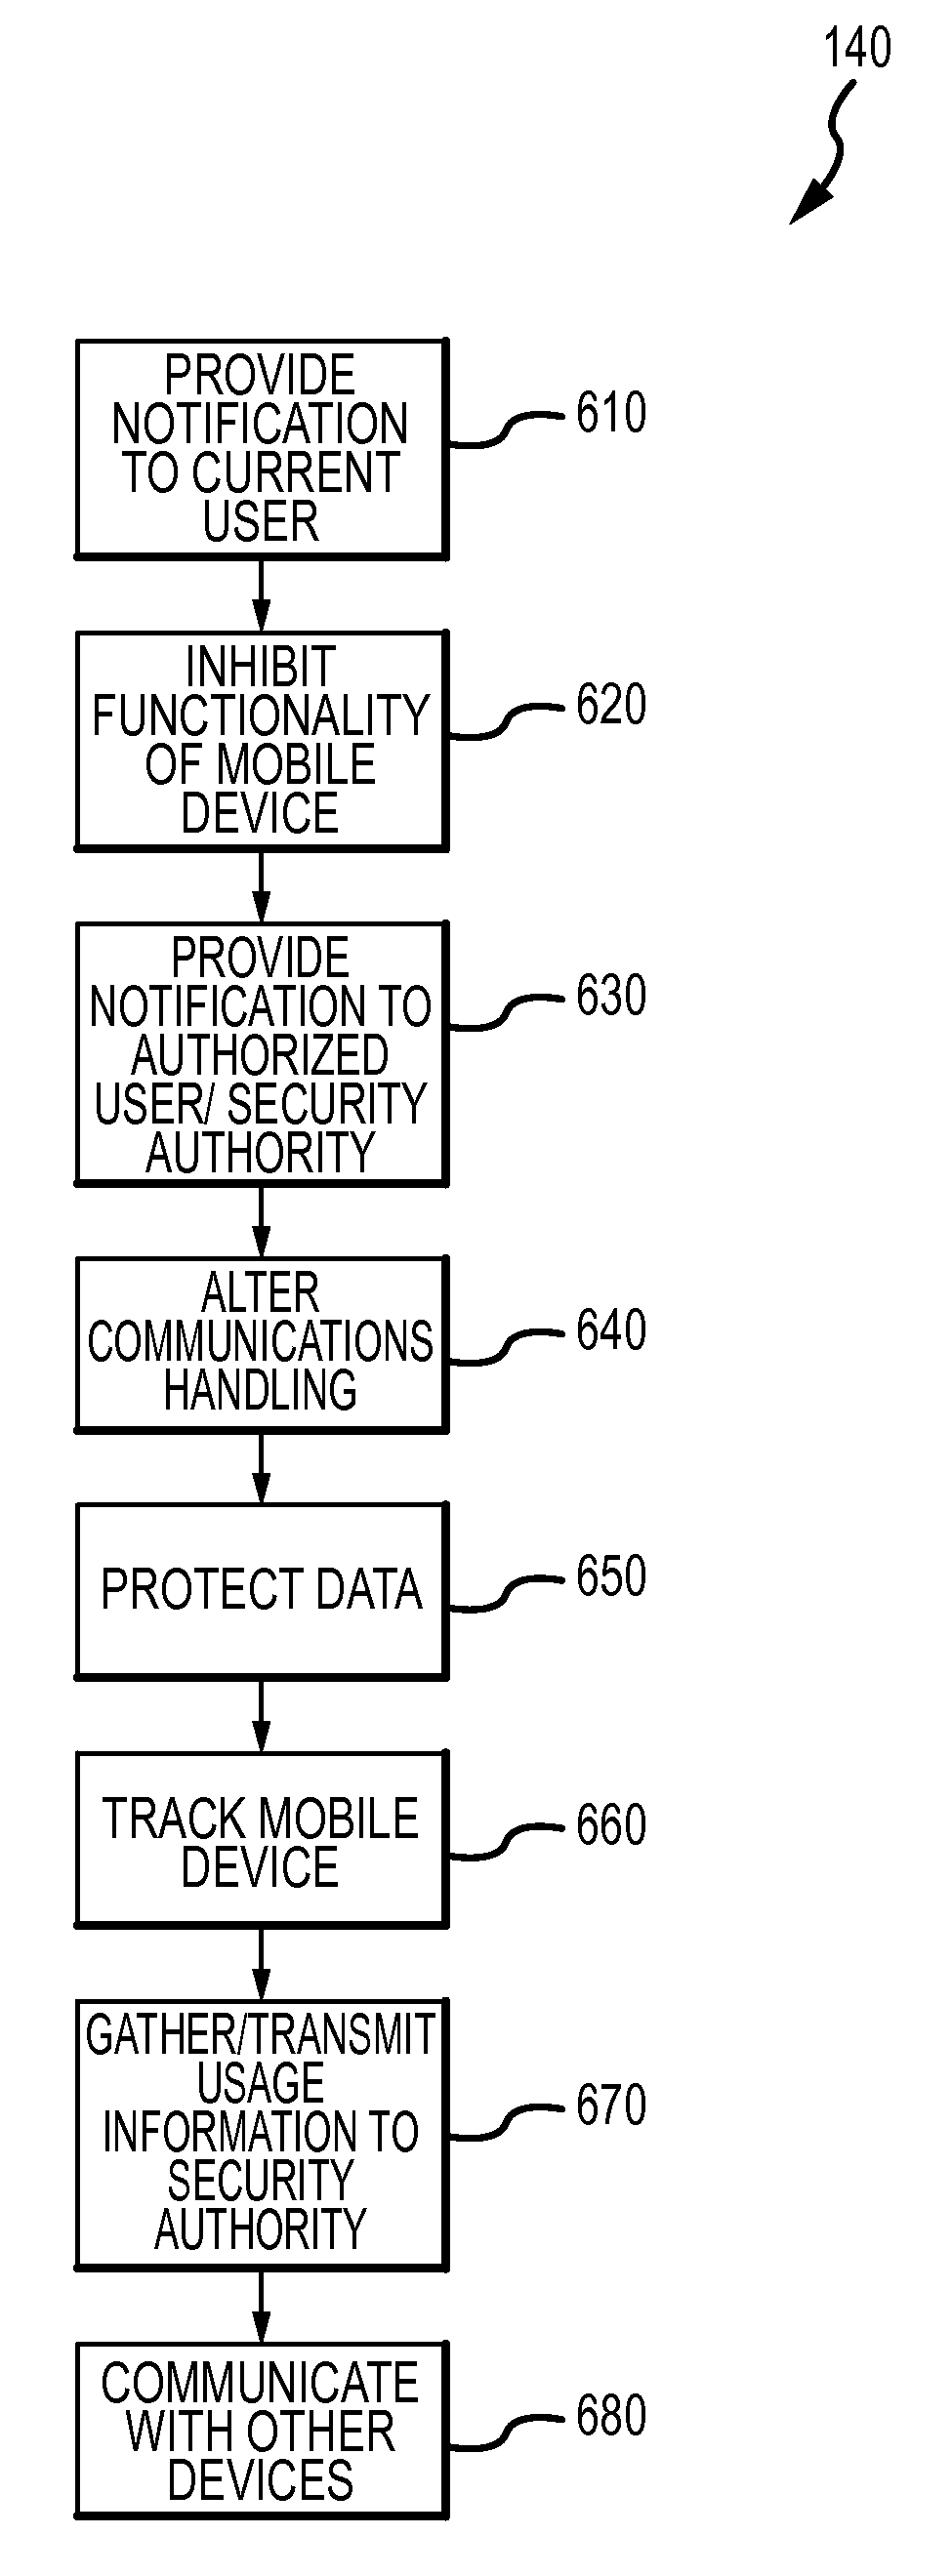 Method for mitigating the unauthorized use of a device